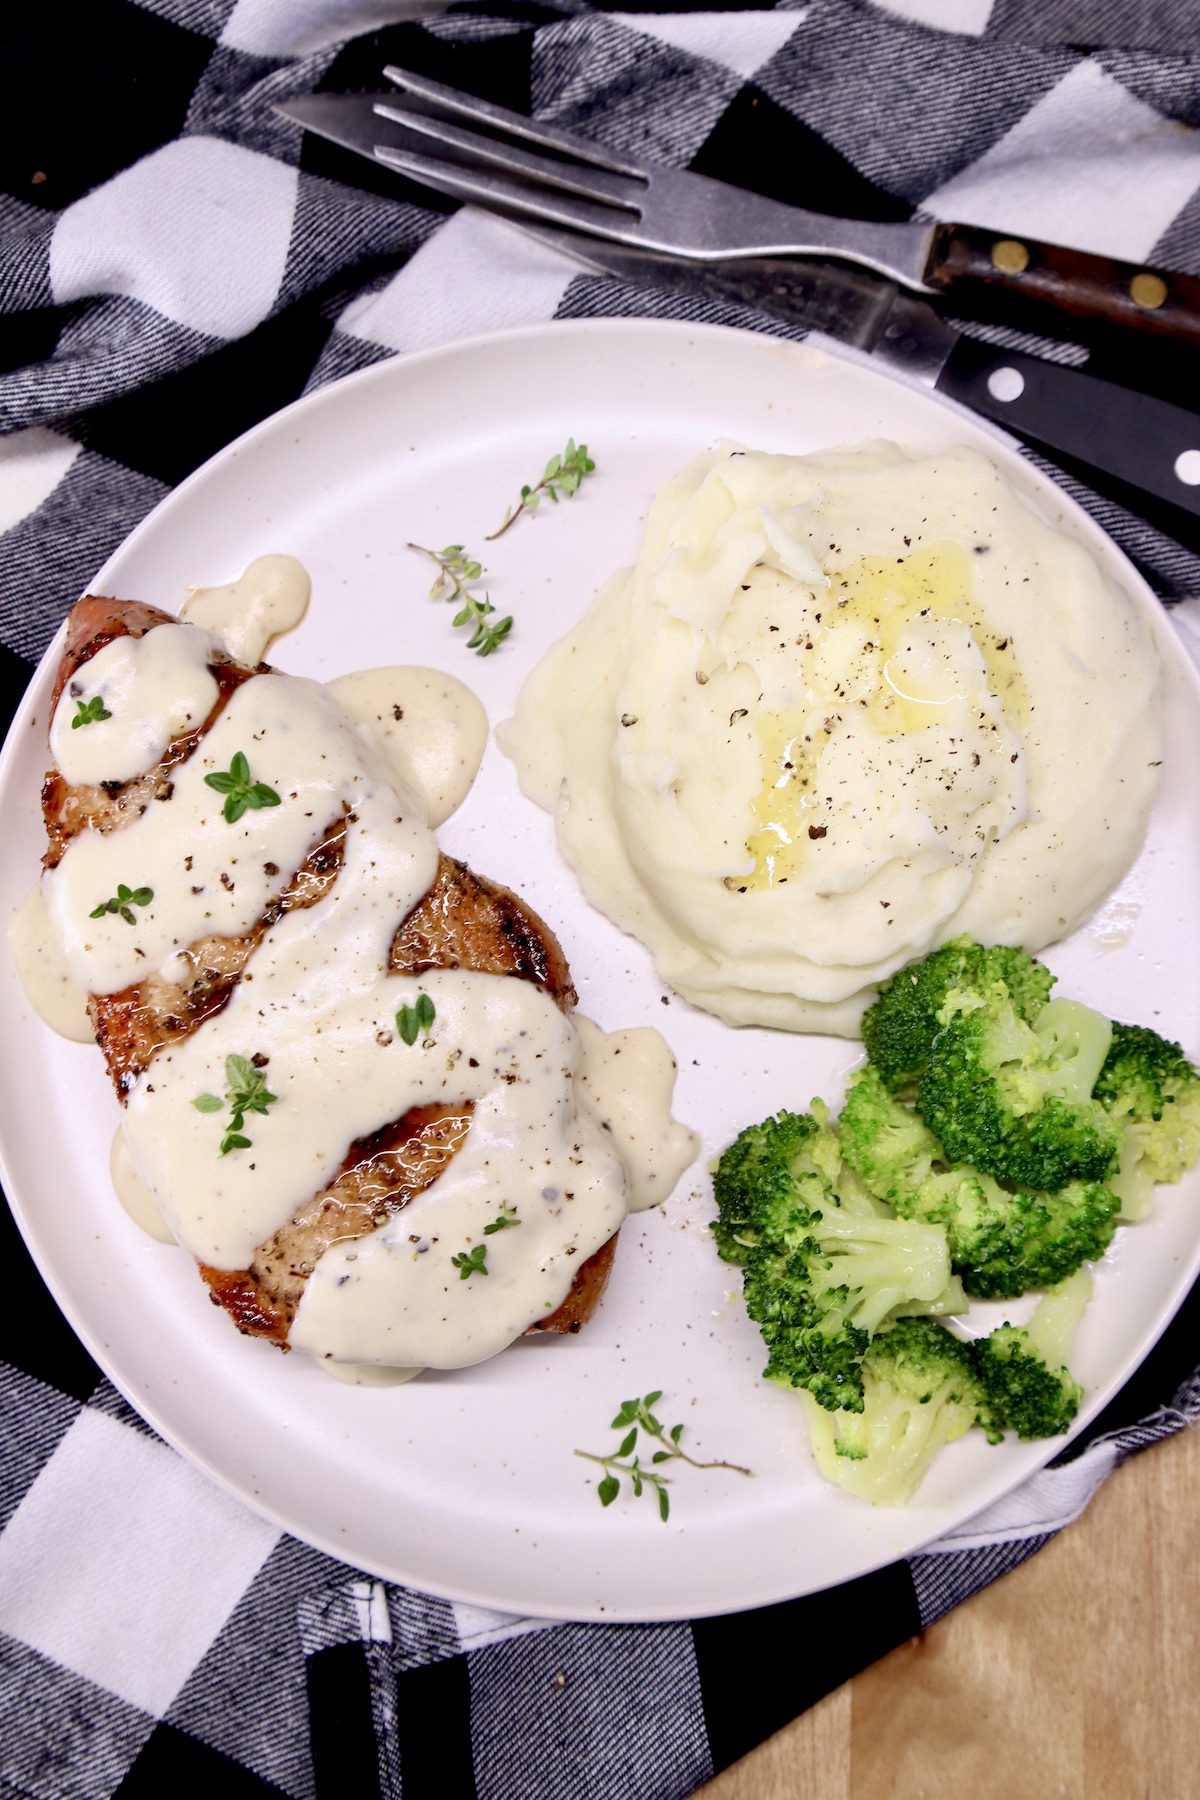 grilled pork chop with sour cream sauce, mashed potatoes, broccoli on a plate